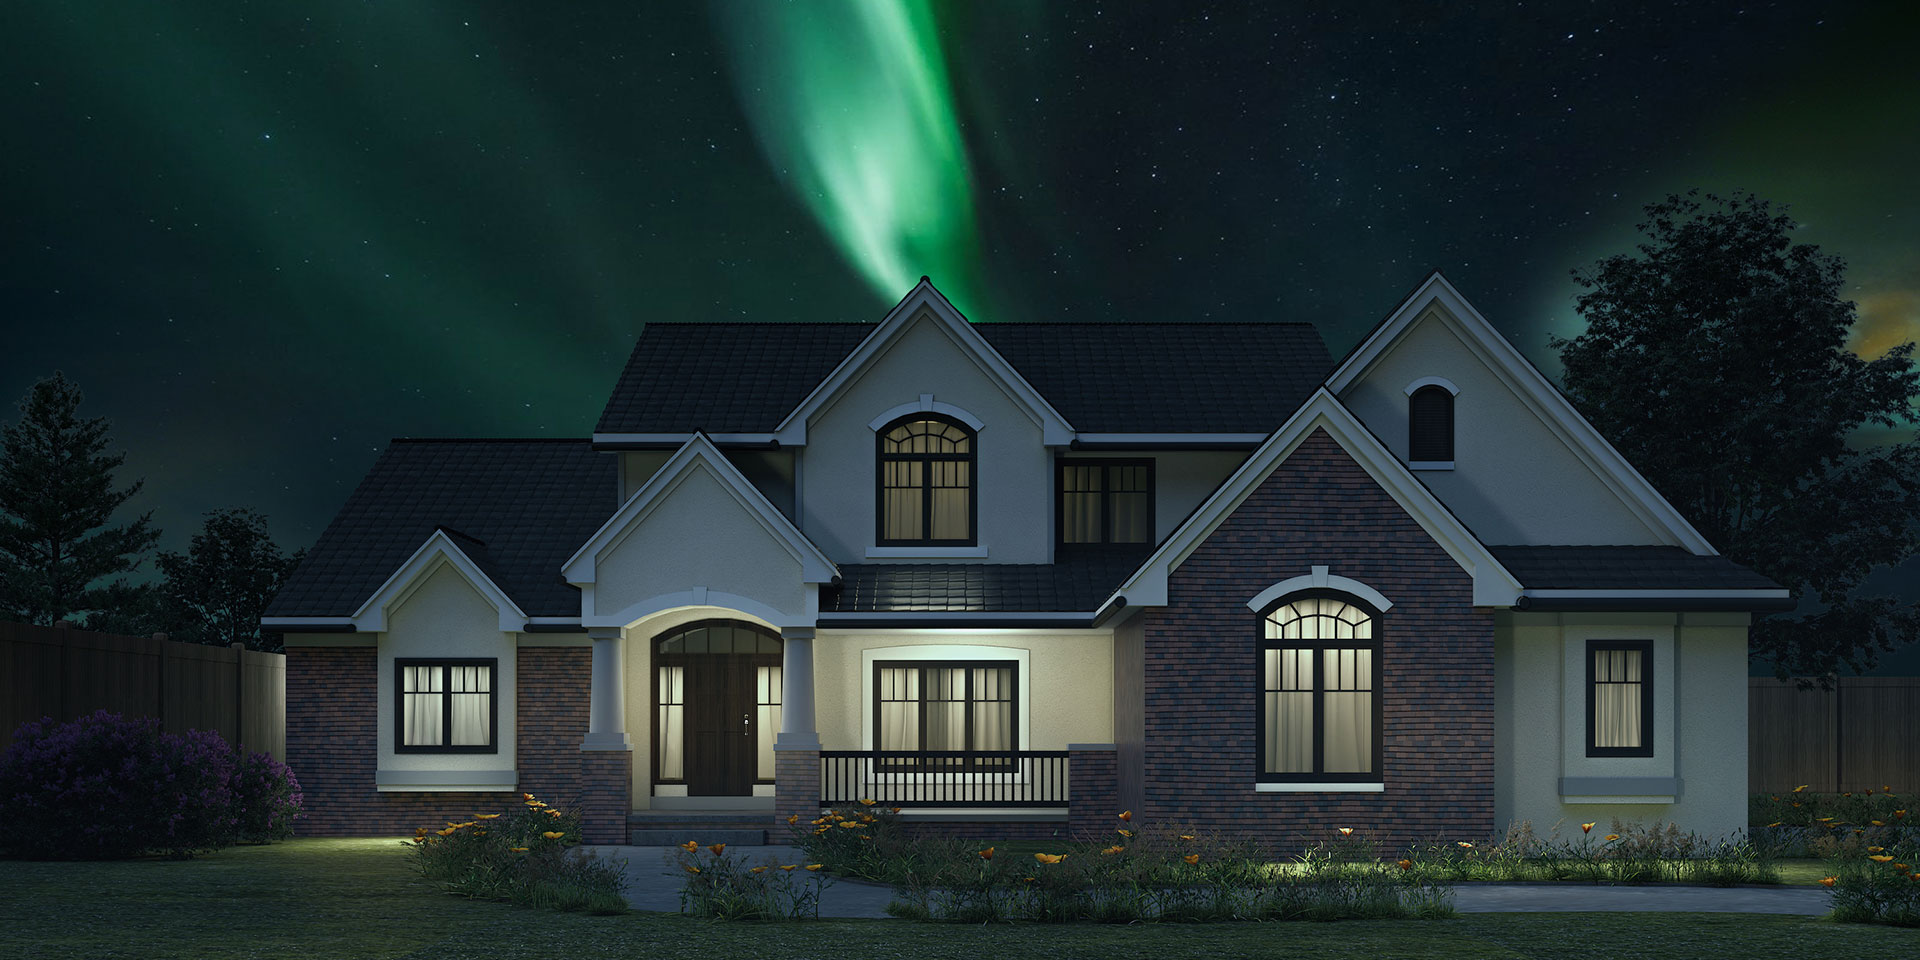 3D Rendering with Northern Lighting effects